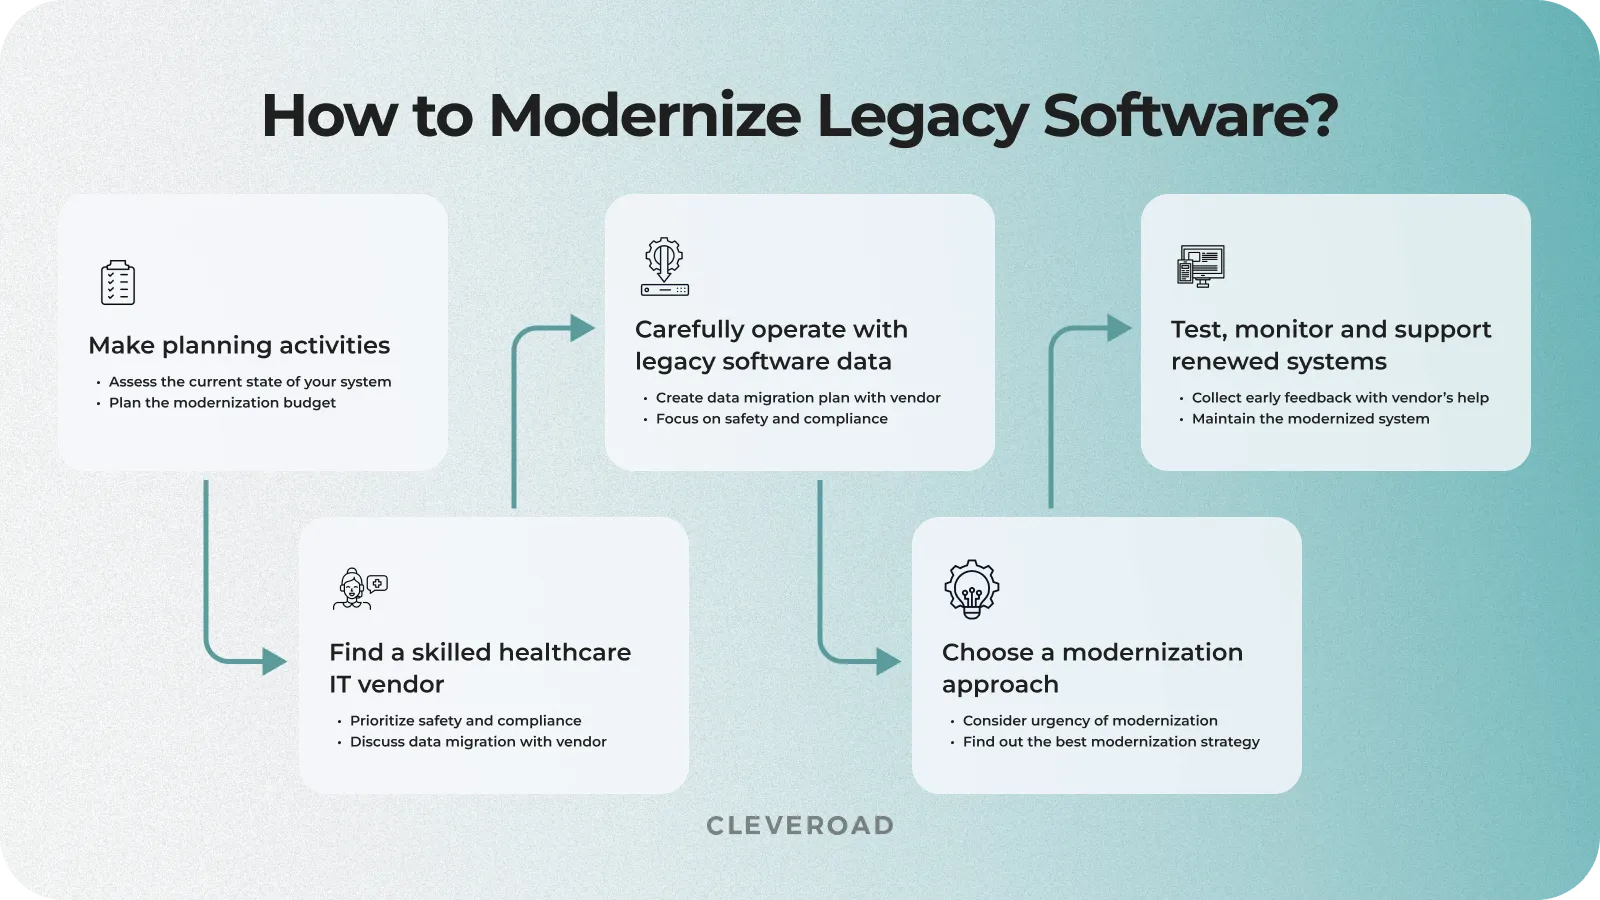 Necessary steps for your healthcare systems modernization